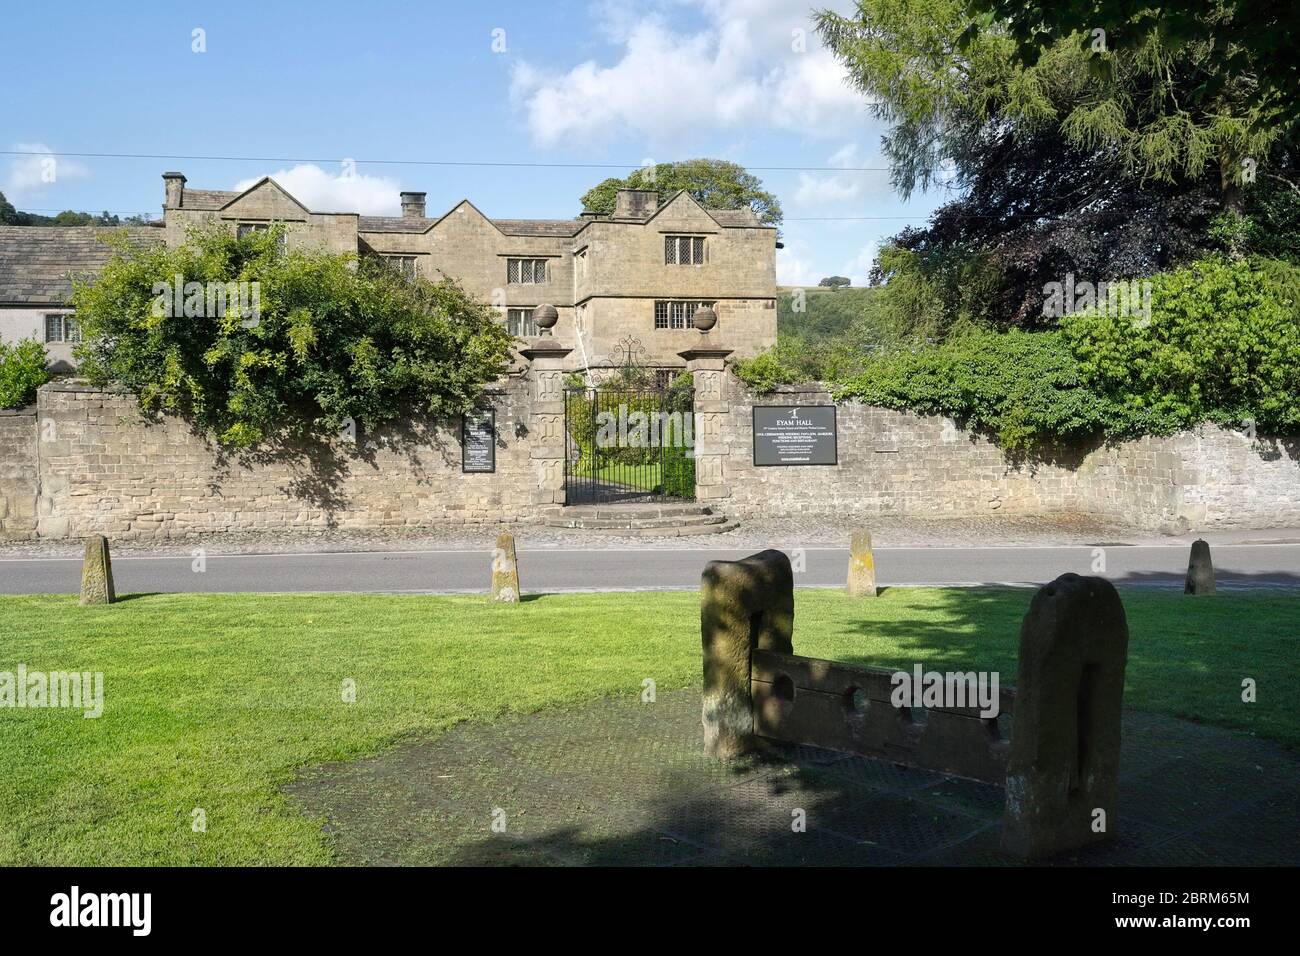 Eyam Hall in the Peak District, National Park Derbyshire England UK, Jacobian styled historic, grade II listed building and village stocks Stock Photo